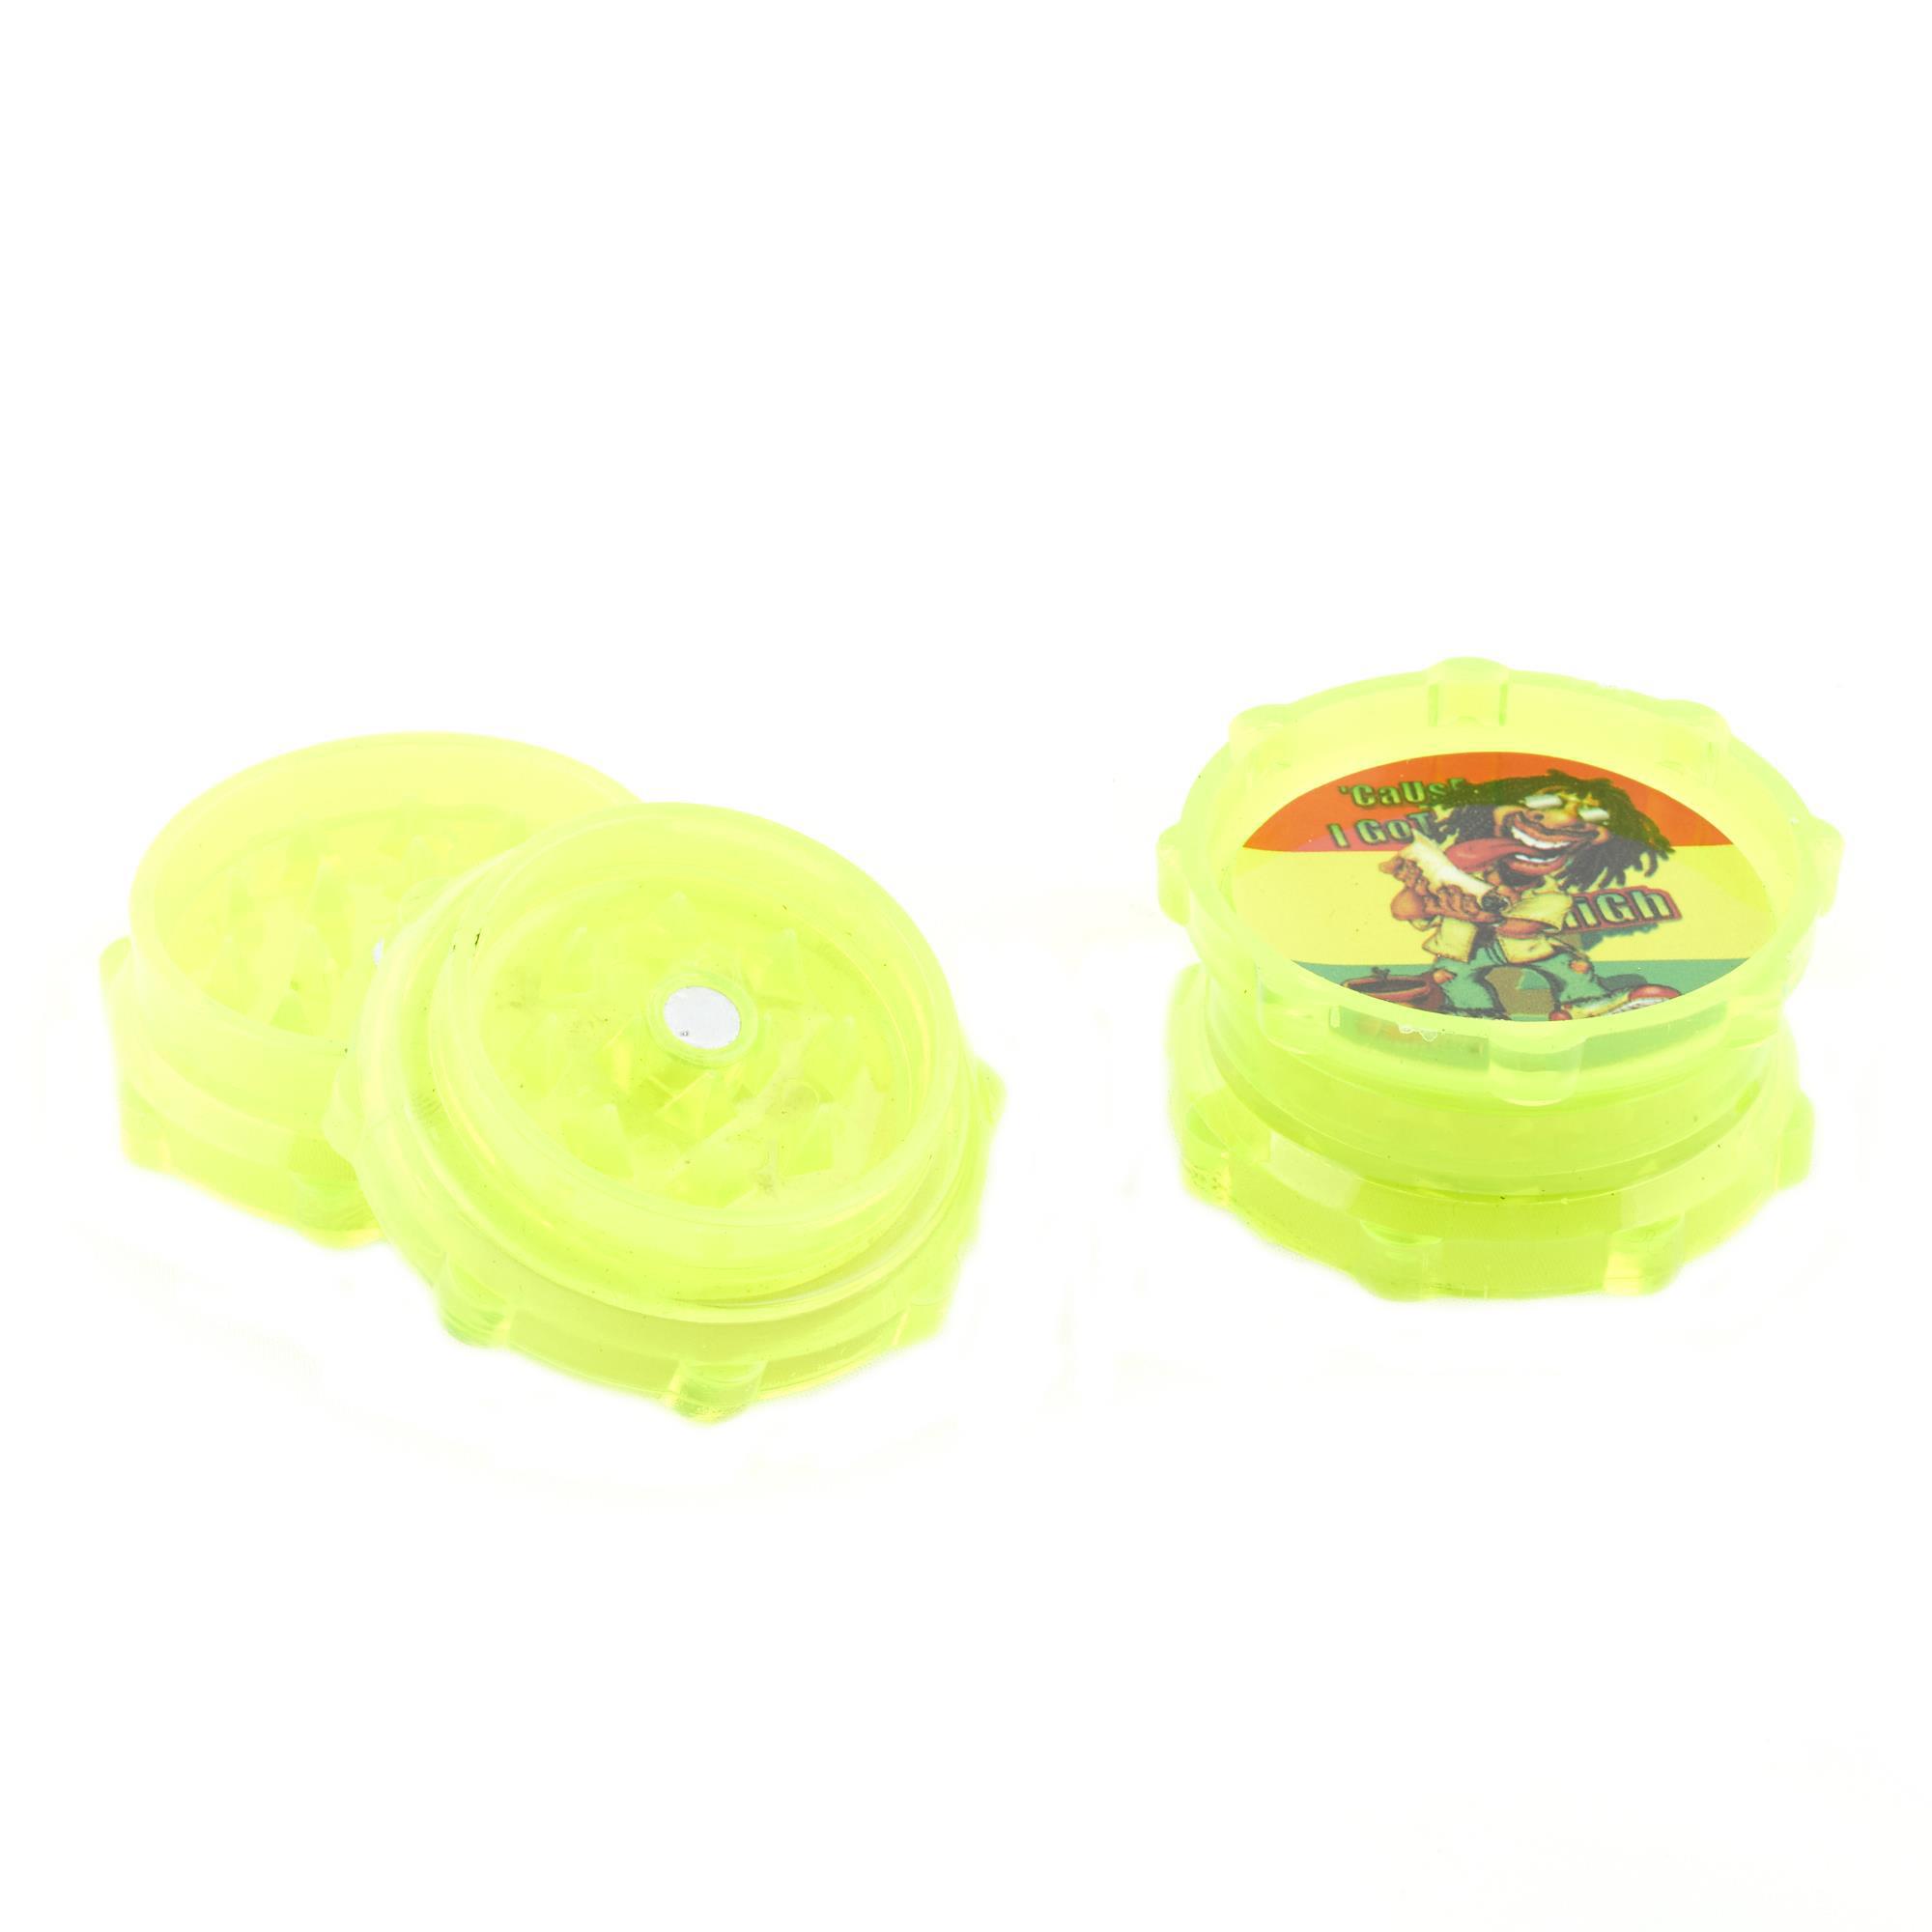 COLORED ACRYLIC GRINDER